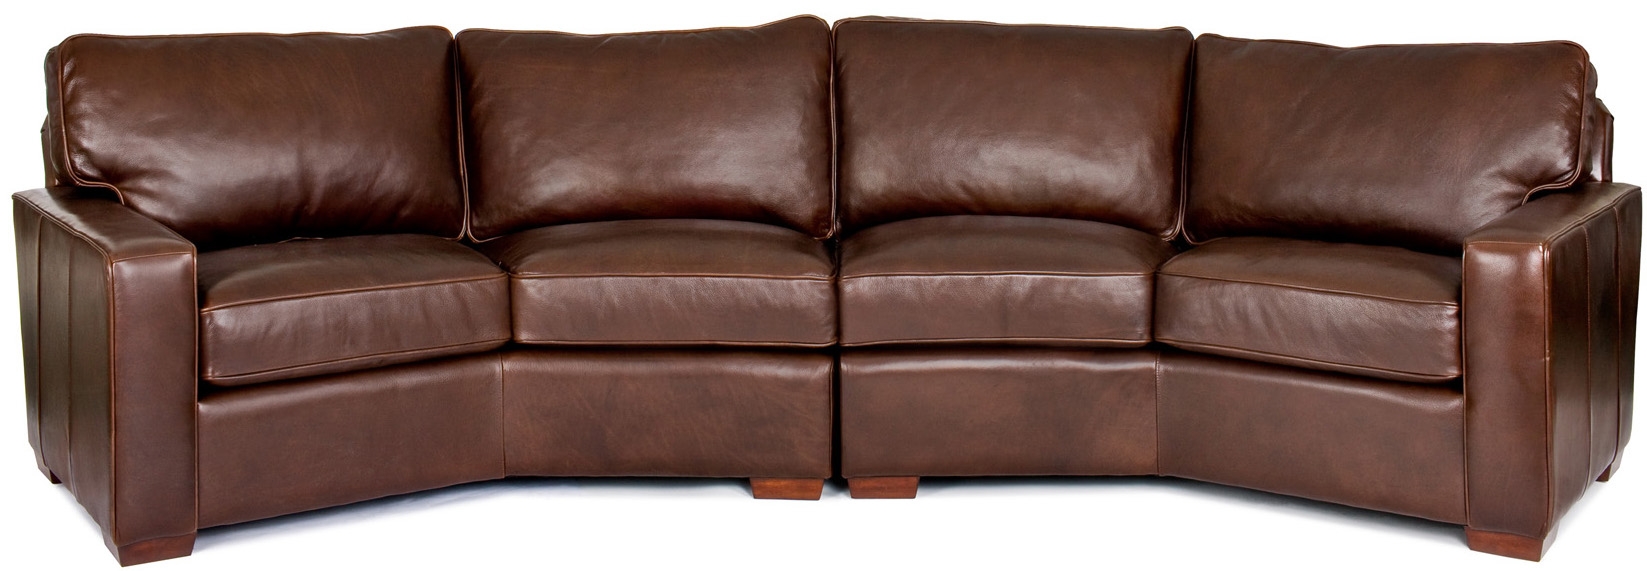 SECTIONALS - Leather & High End Upholstered Furniture Garvey Sectional Sofa